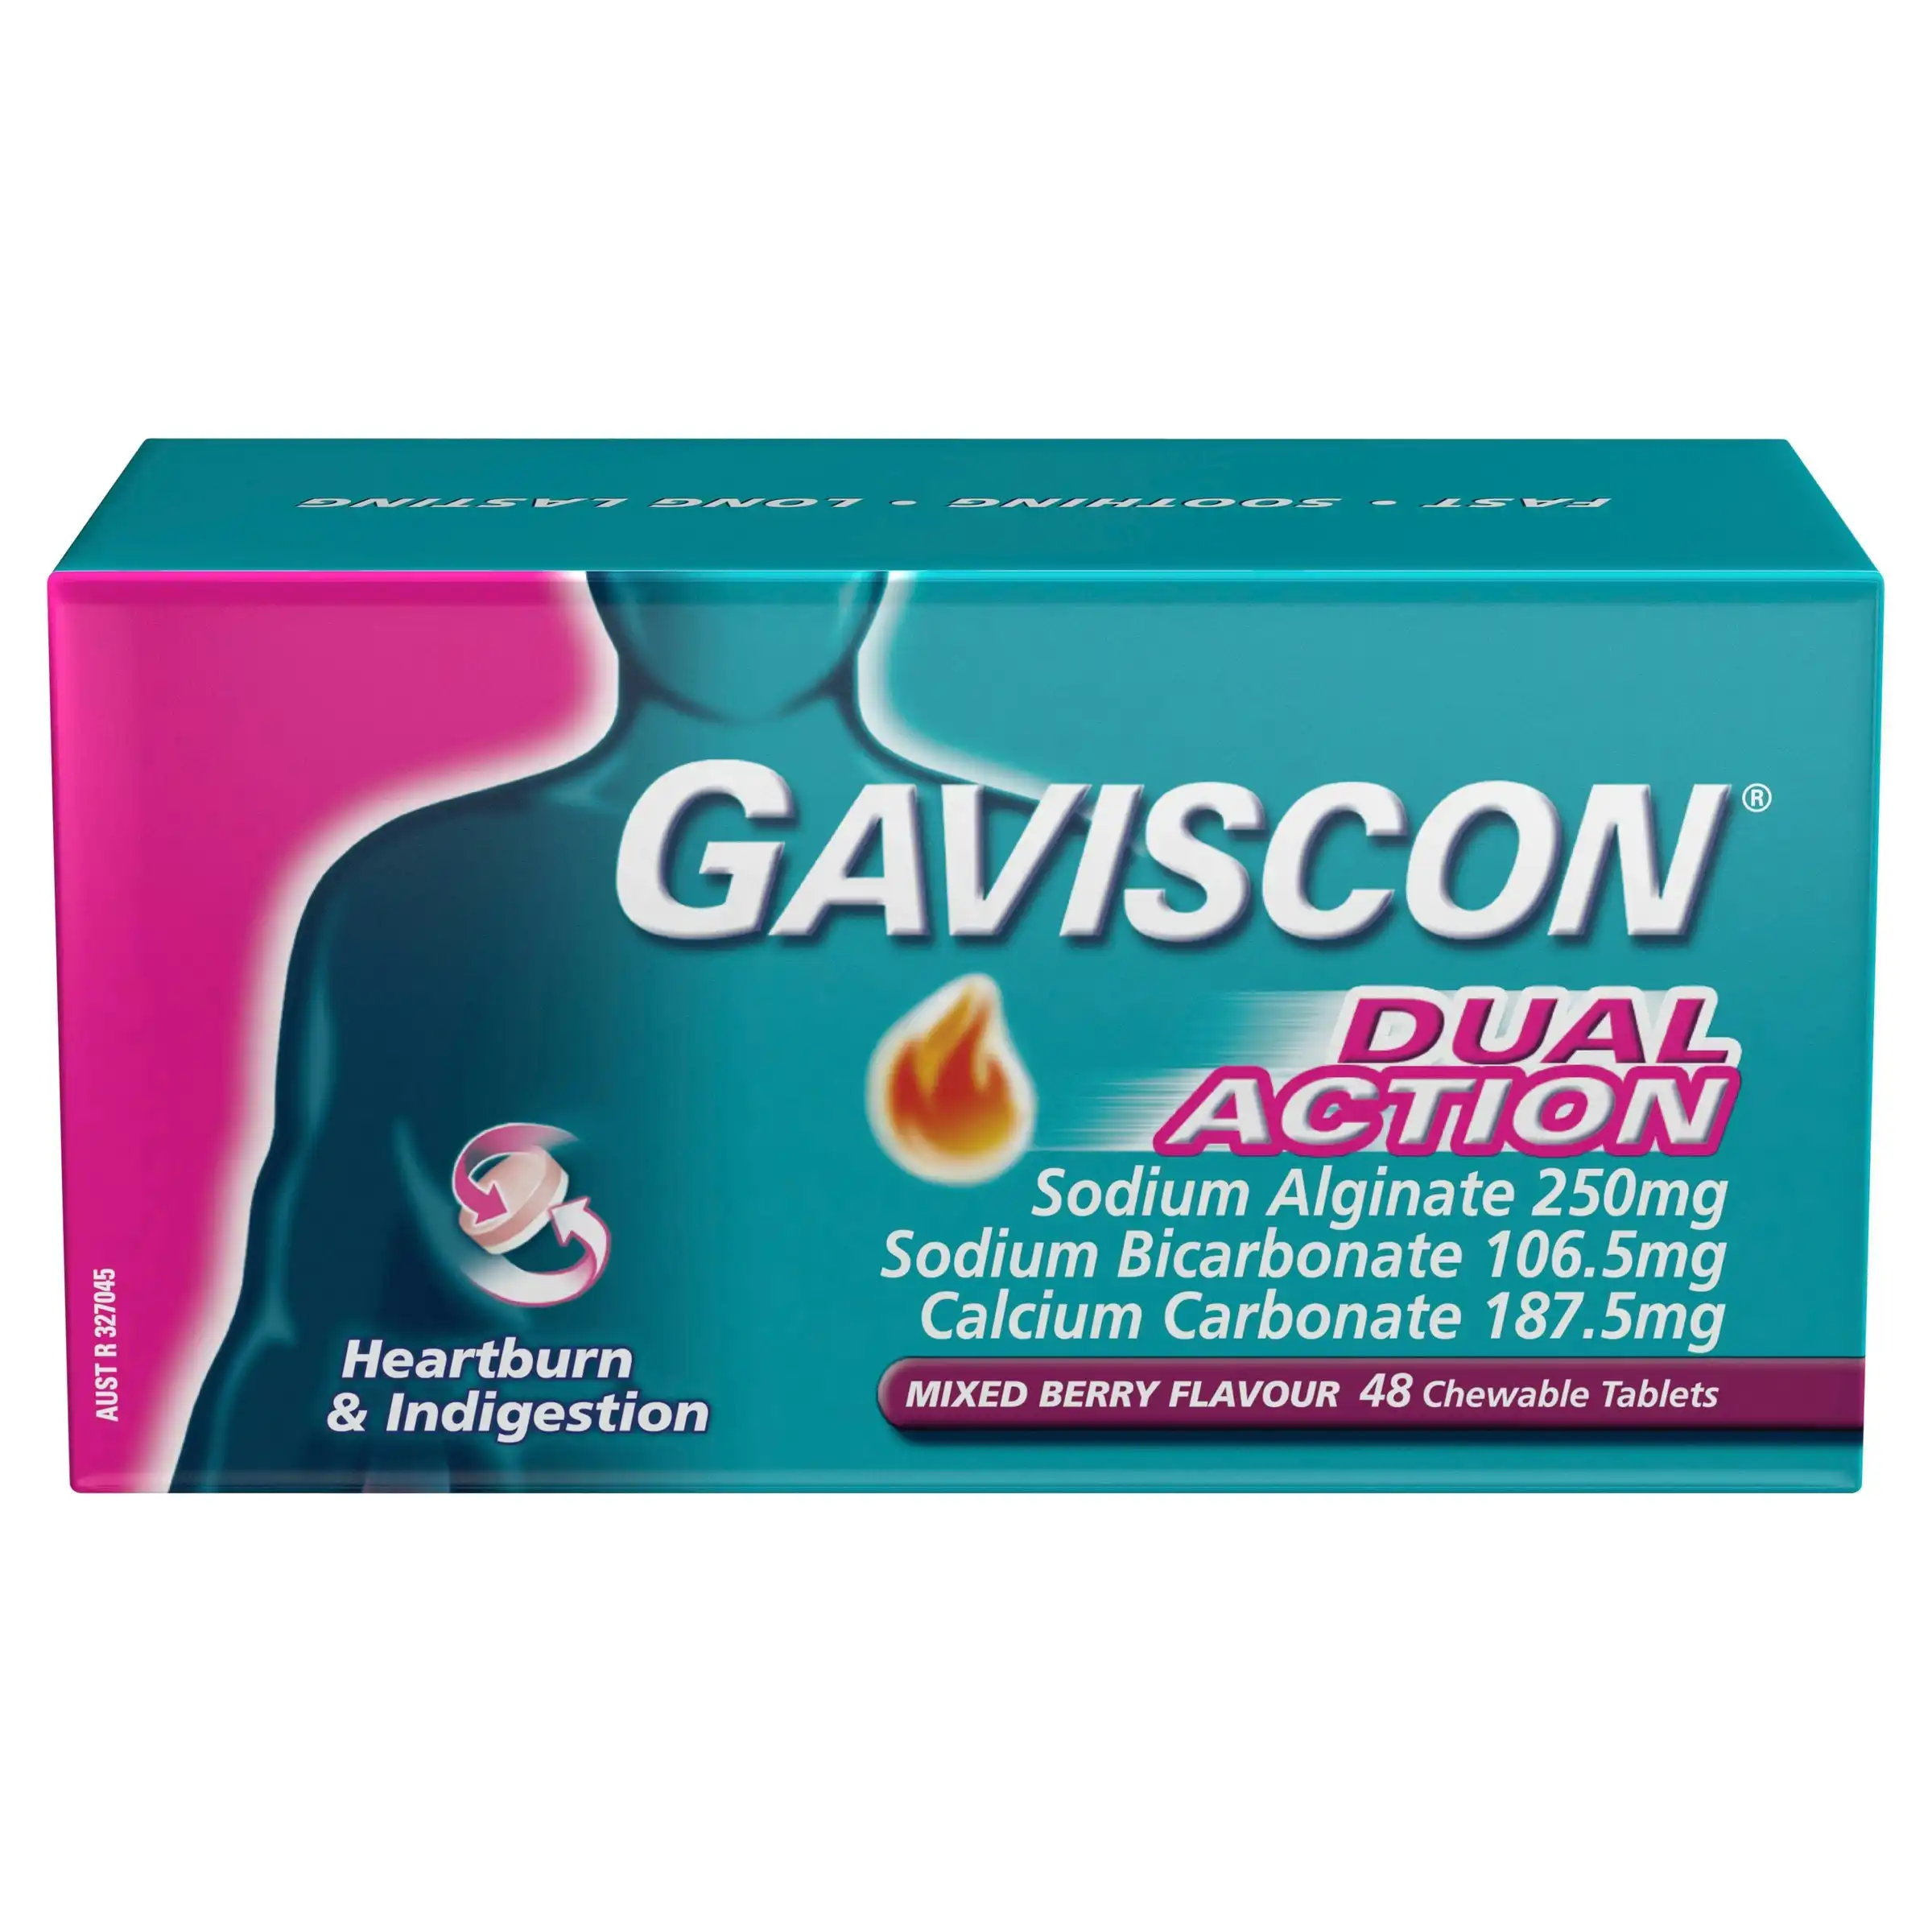 Gaviscon Dual Action Mixed Berry 48 Chewable Tablets